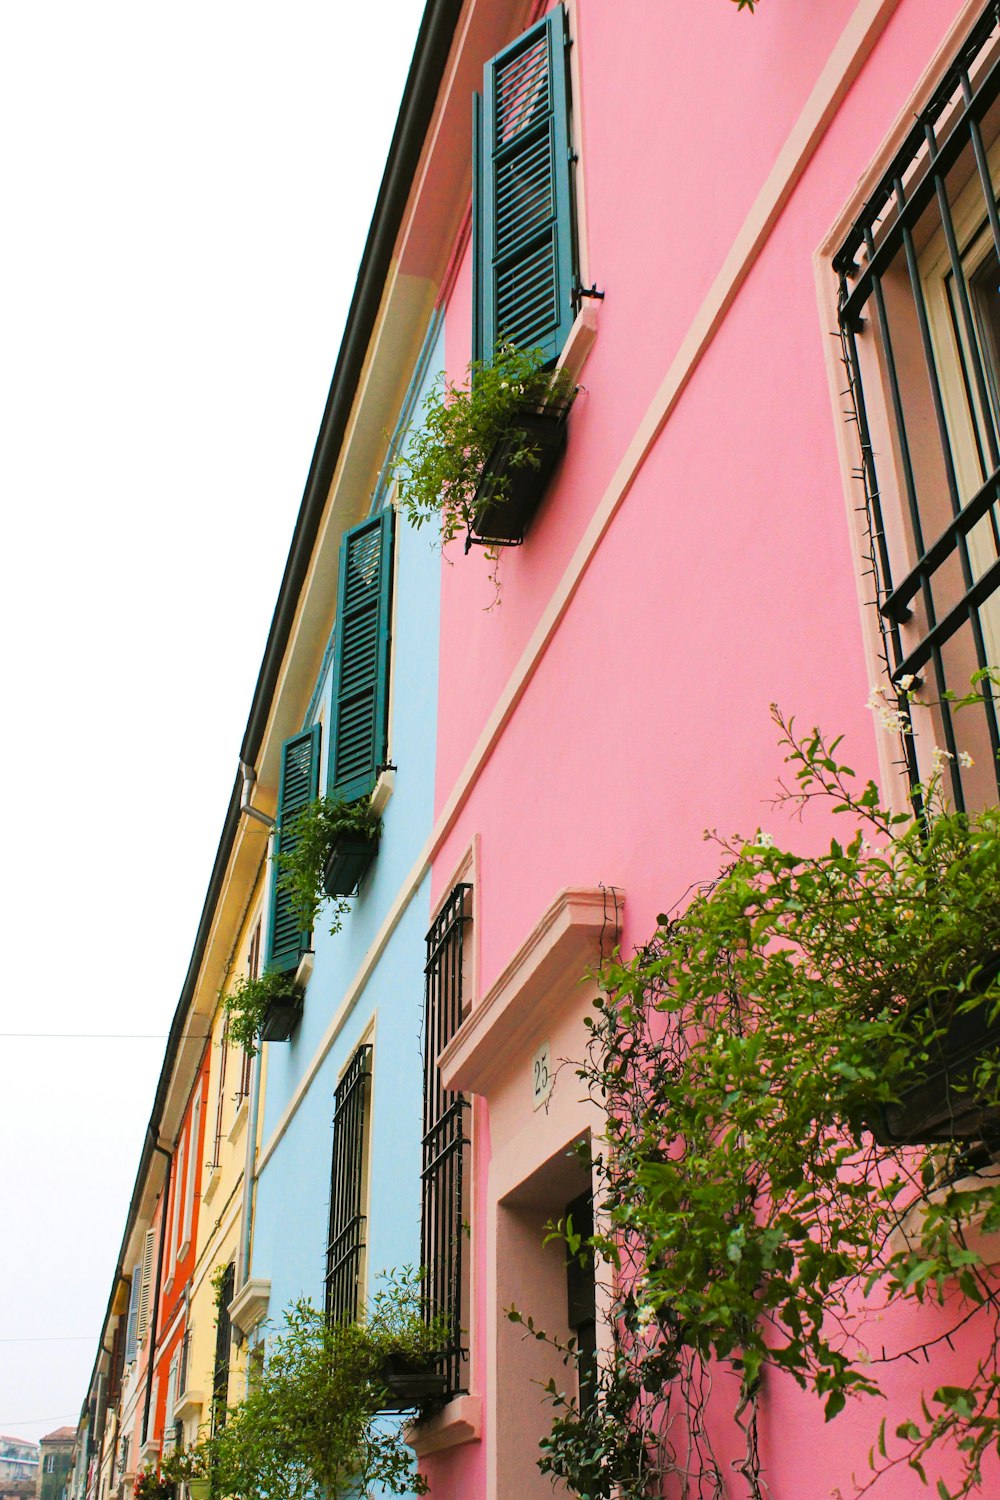 a row of colorful buildings with green shutters